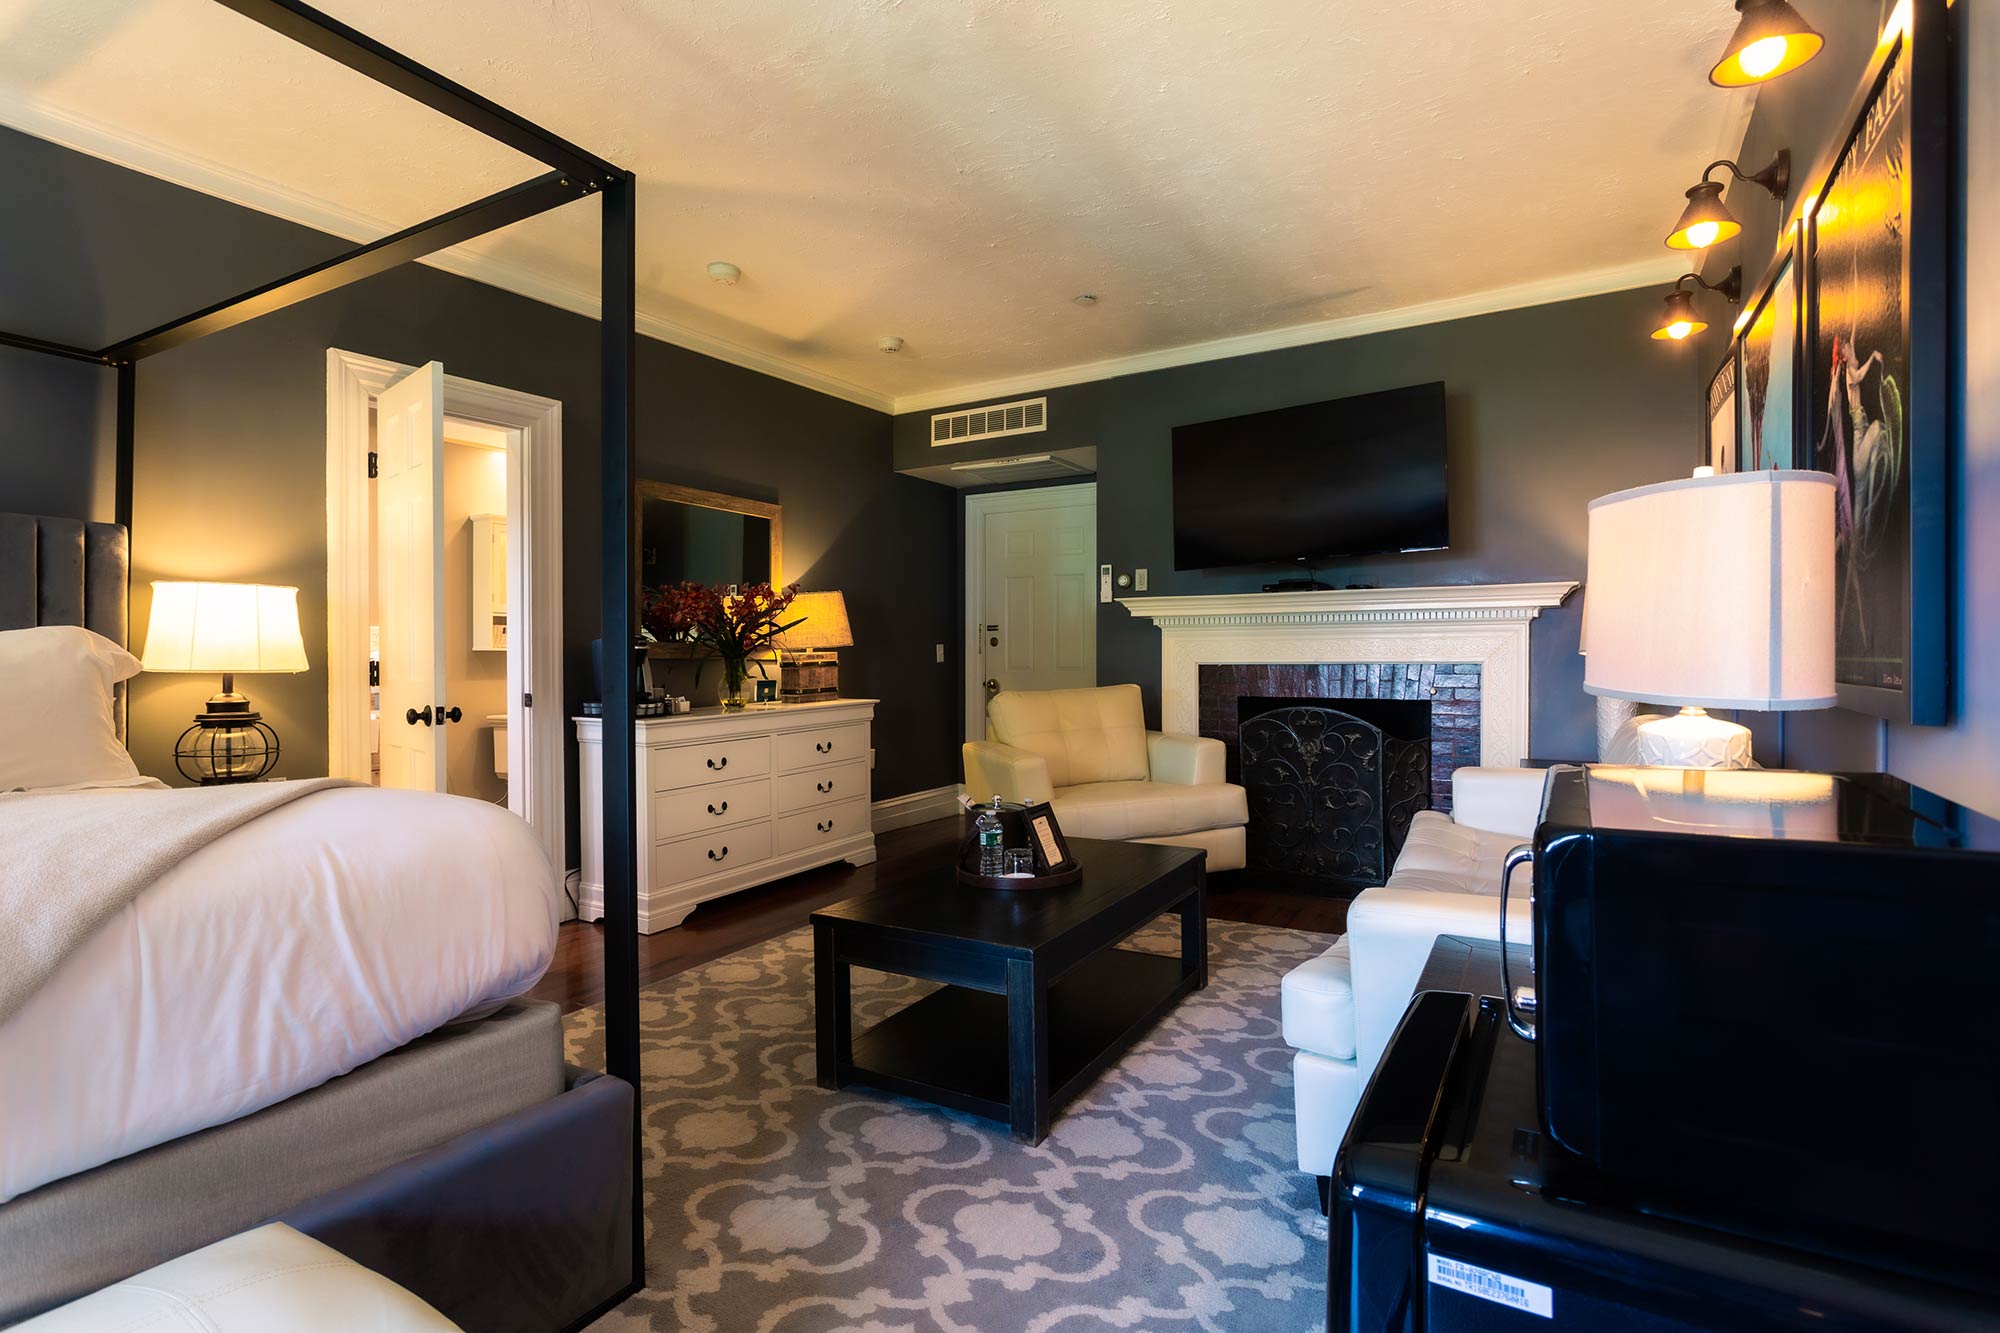 Hotel suite with seating and fireplace.